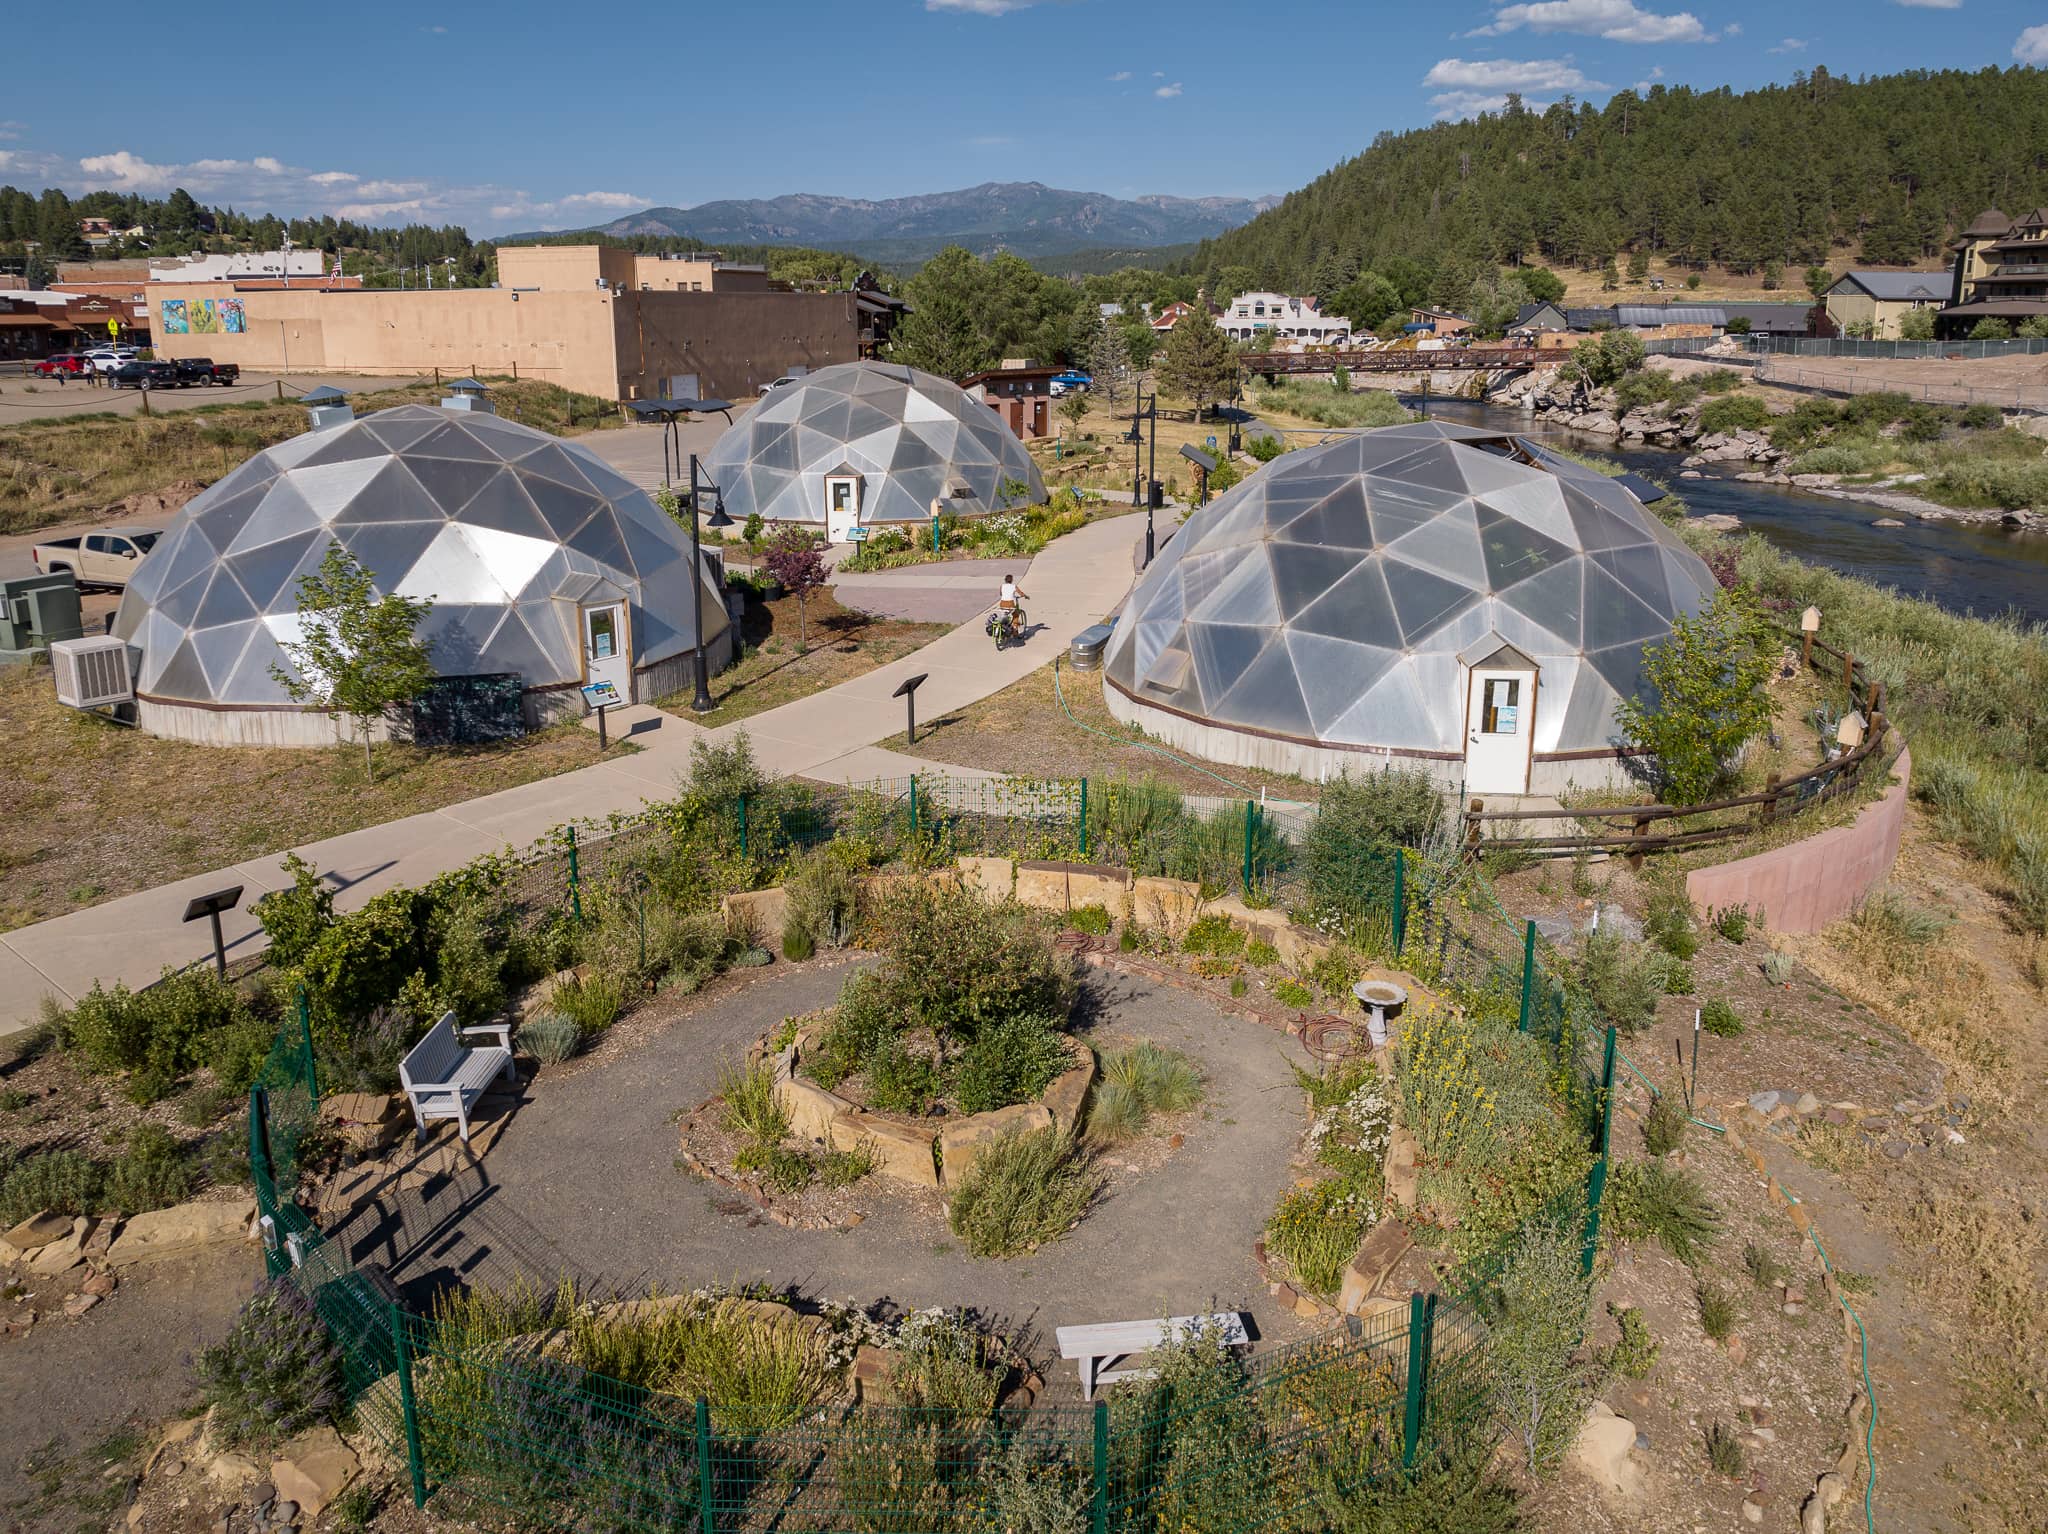 Geothermal Domes in Landscaped Park by River